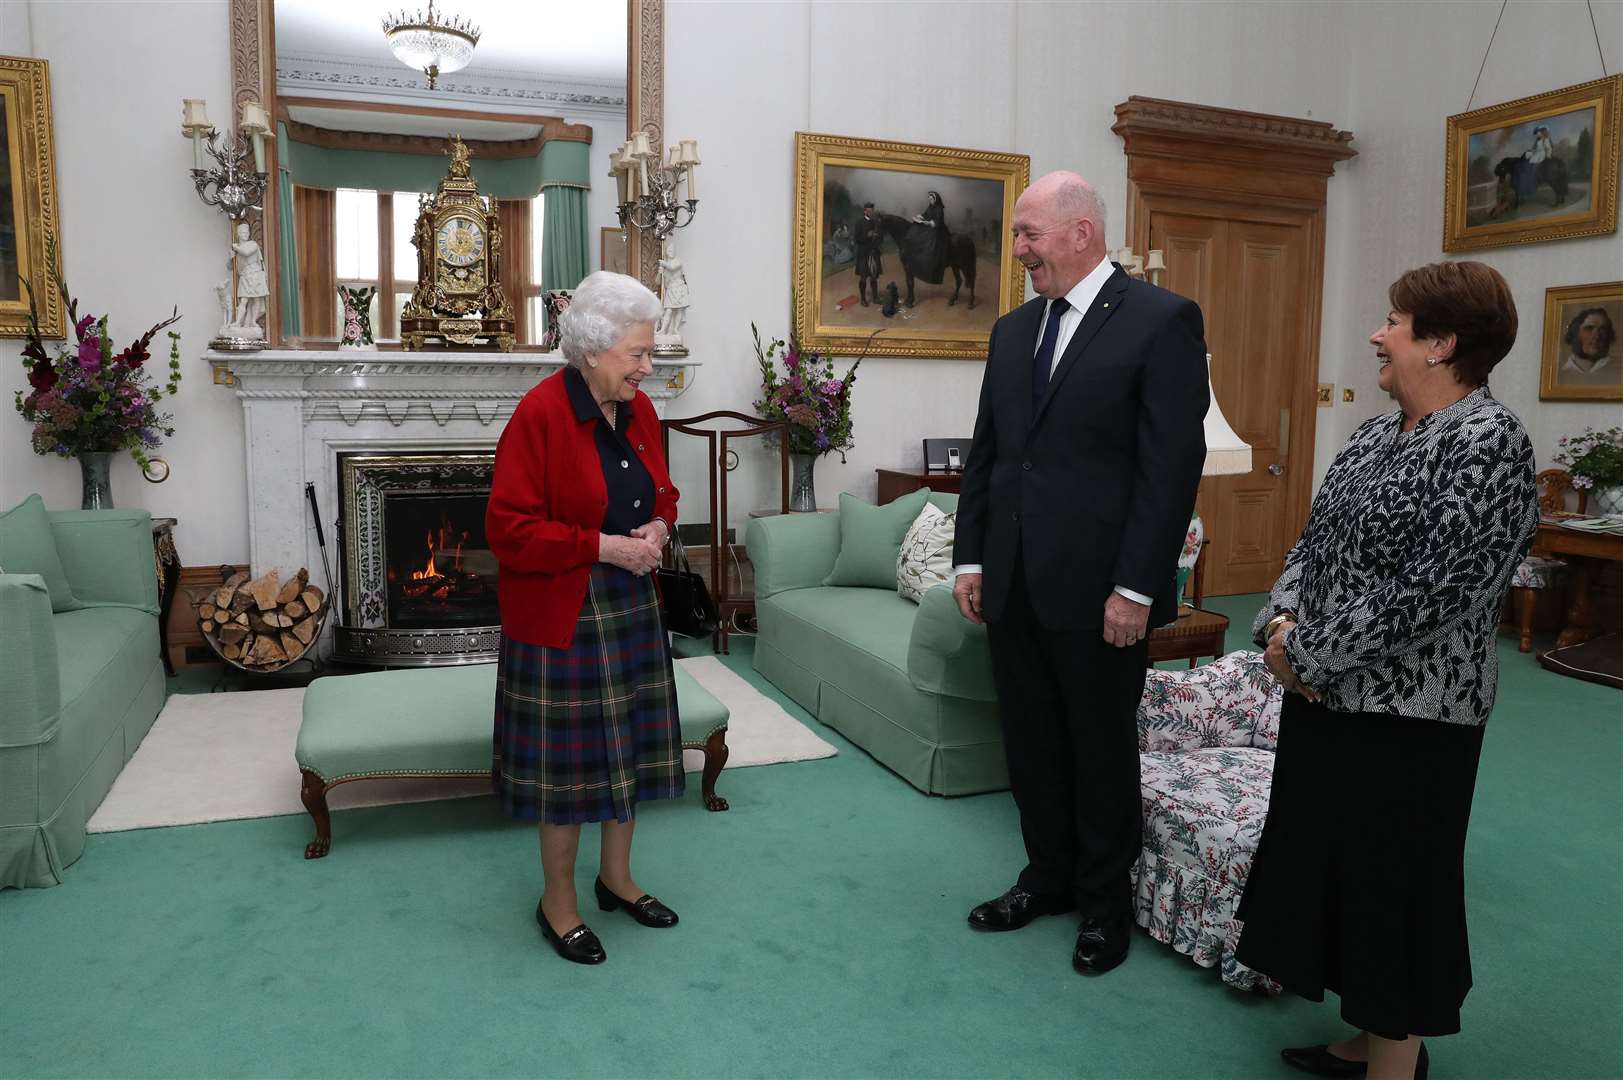 The Queen will hold the audiences with Boris Johnson and Liz Truss in the Drawing Room at Balmoral Castle (Andrew Milligan/PA)